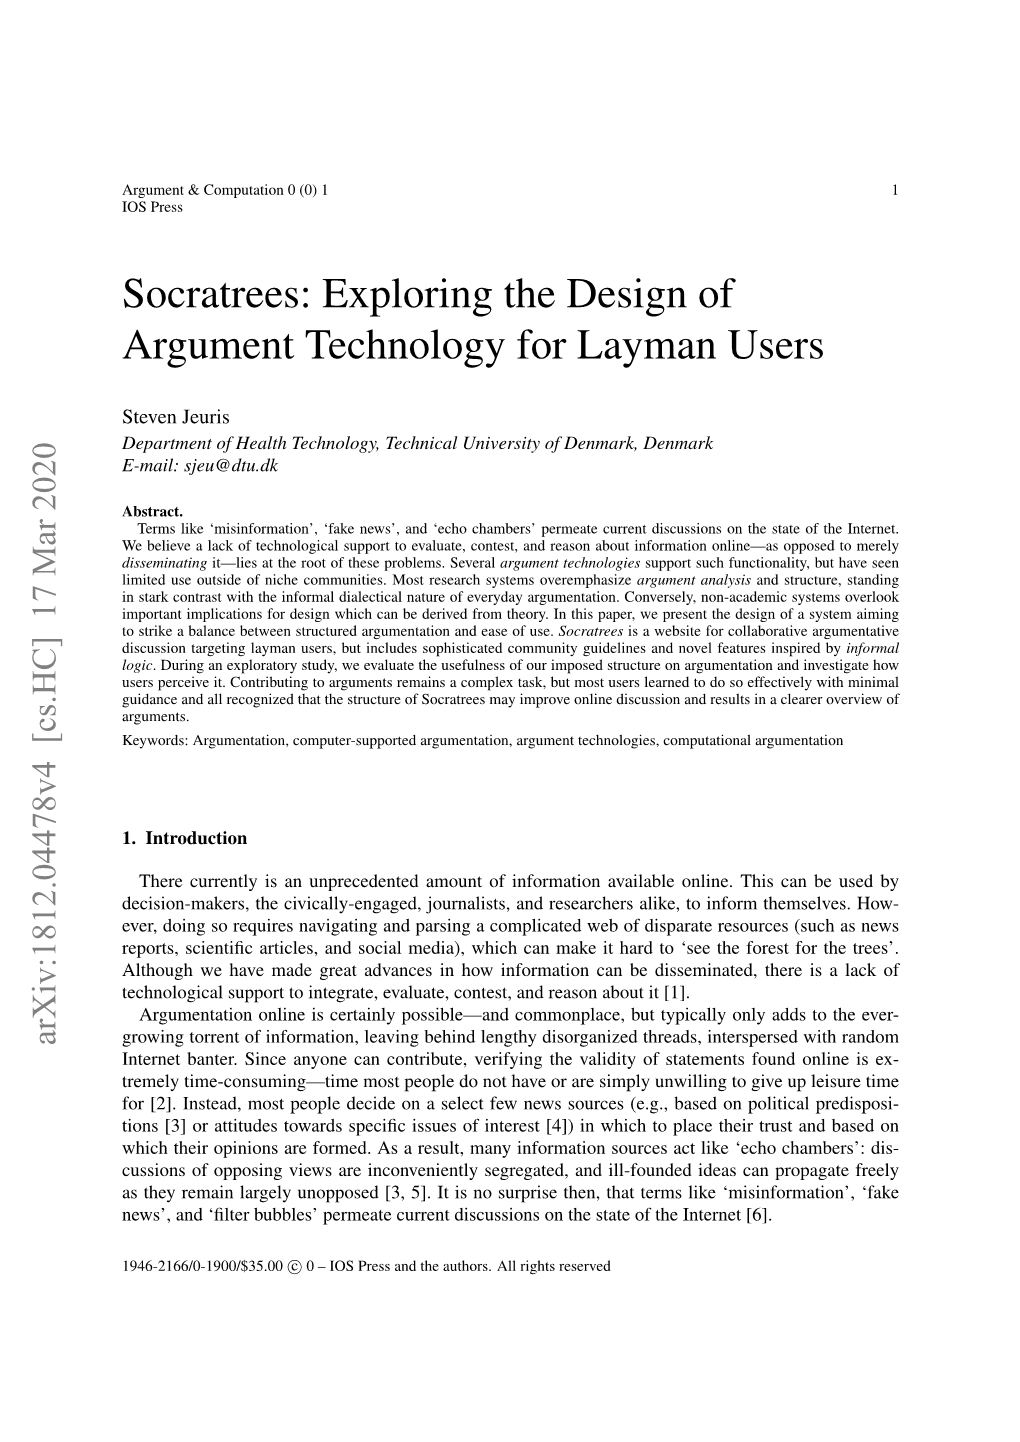 Socratrees: Exploring the Design of Argument Technology for Layman Users